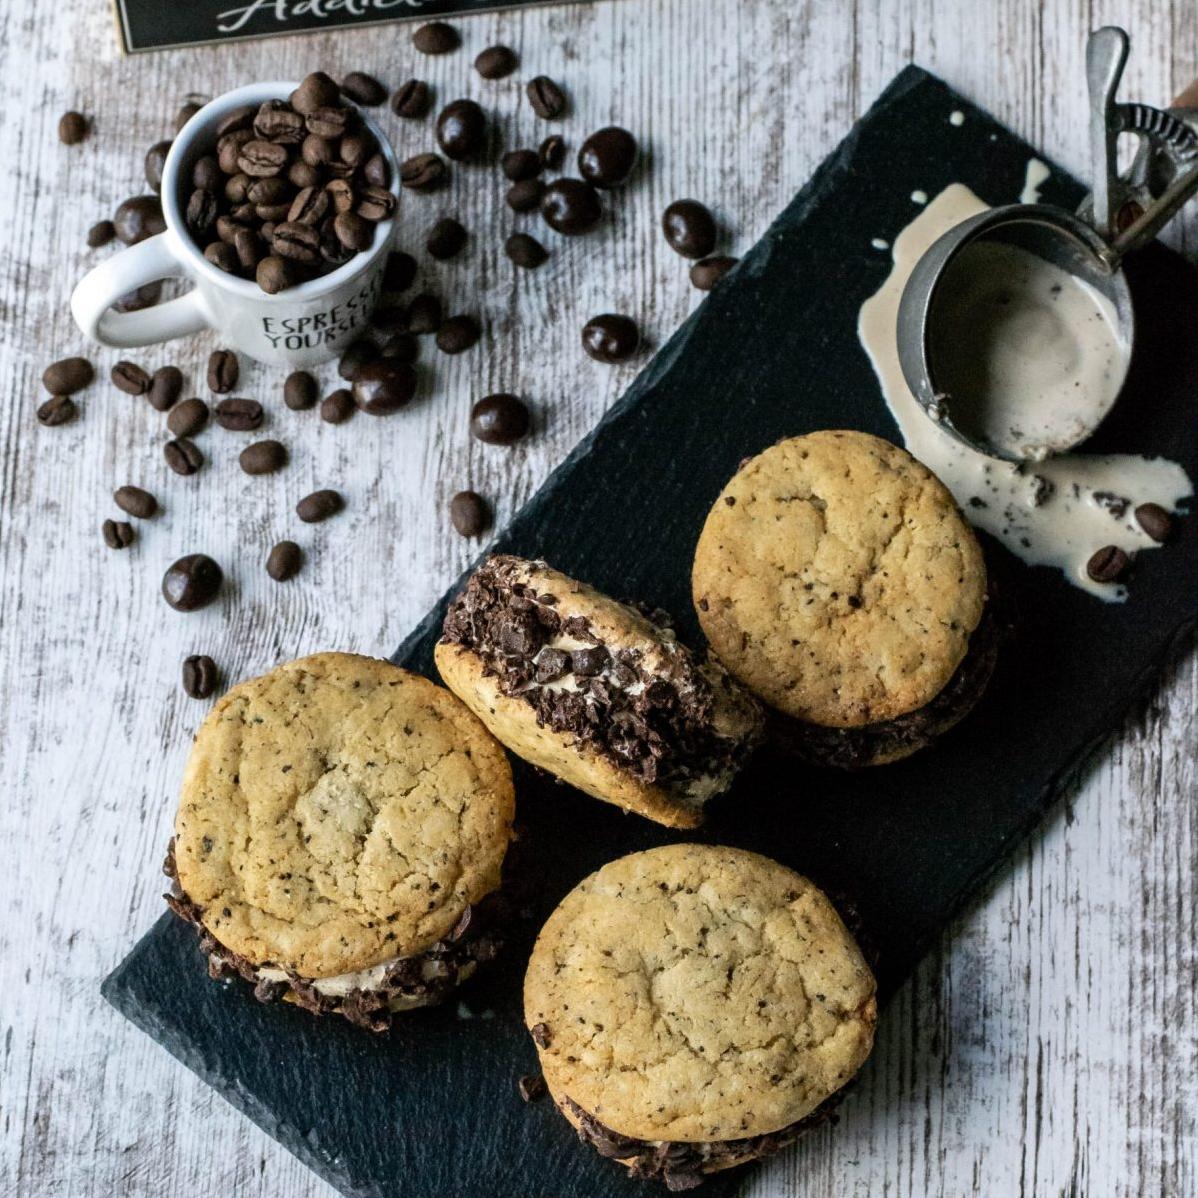  These Espresso Ice Cream Cookie Wrap-Ups are perfect for that hot summer day when you need a caffeine and sugar pick-me-up.